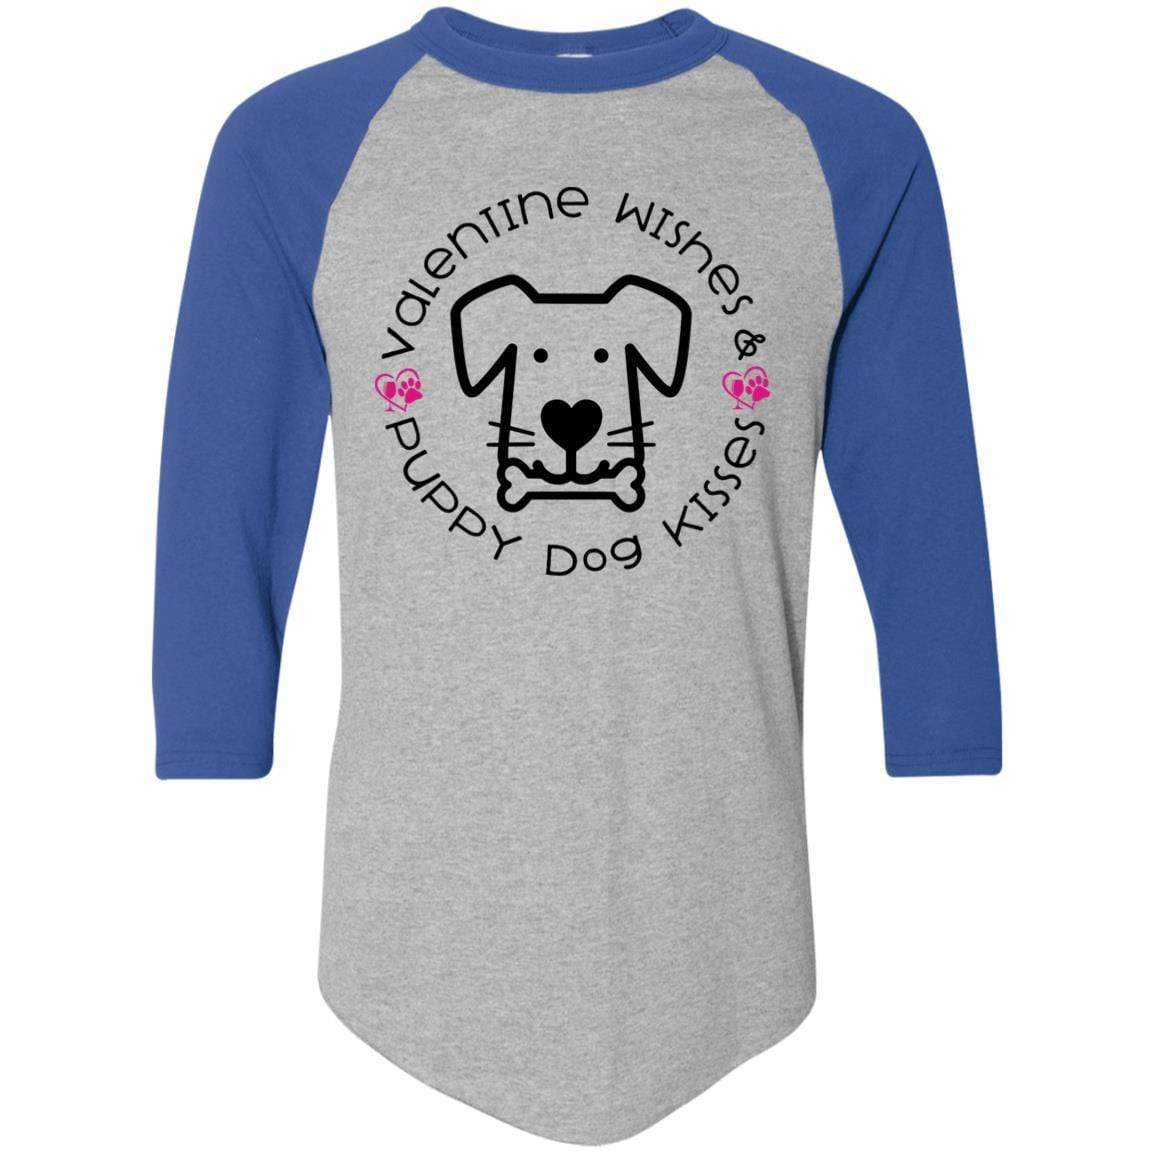 T-Shirts Athletic Heather/Royal / S Winey Bitches Co 'Valentine Wishes and Puppy Dog Kisses" (Dog) Colorblock Raglan Jersey WineyBitchesCo